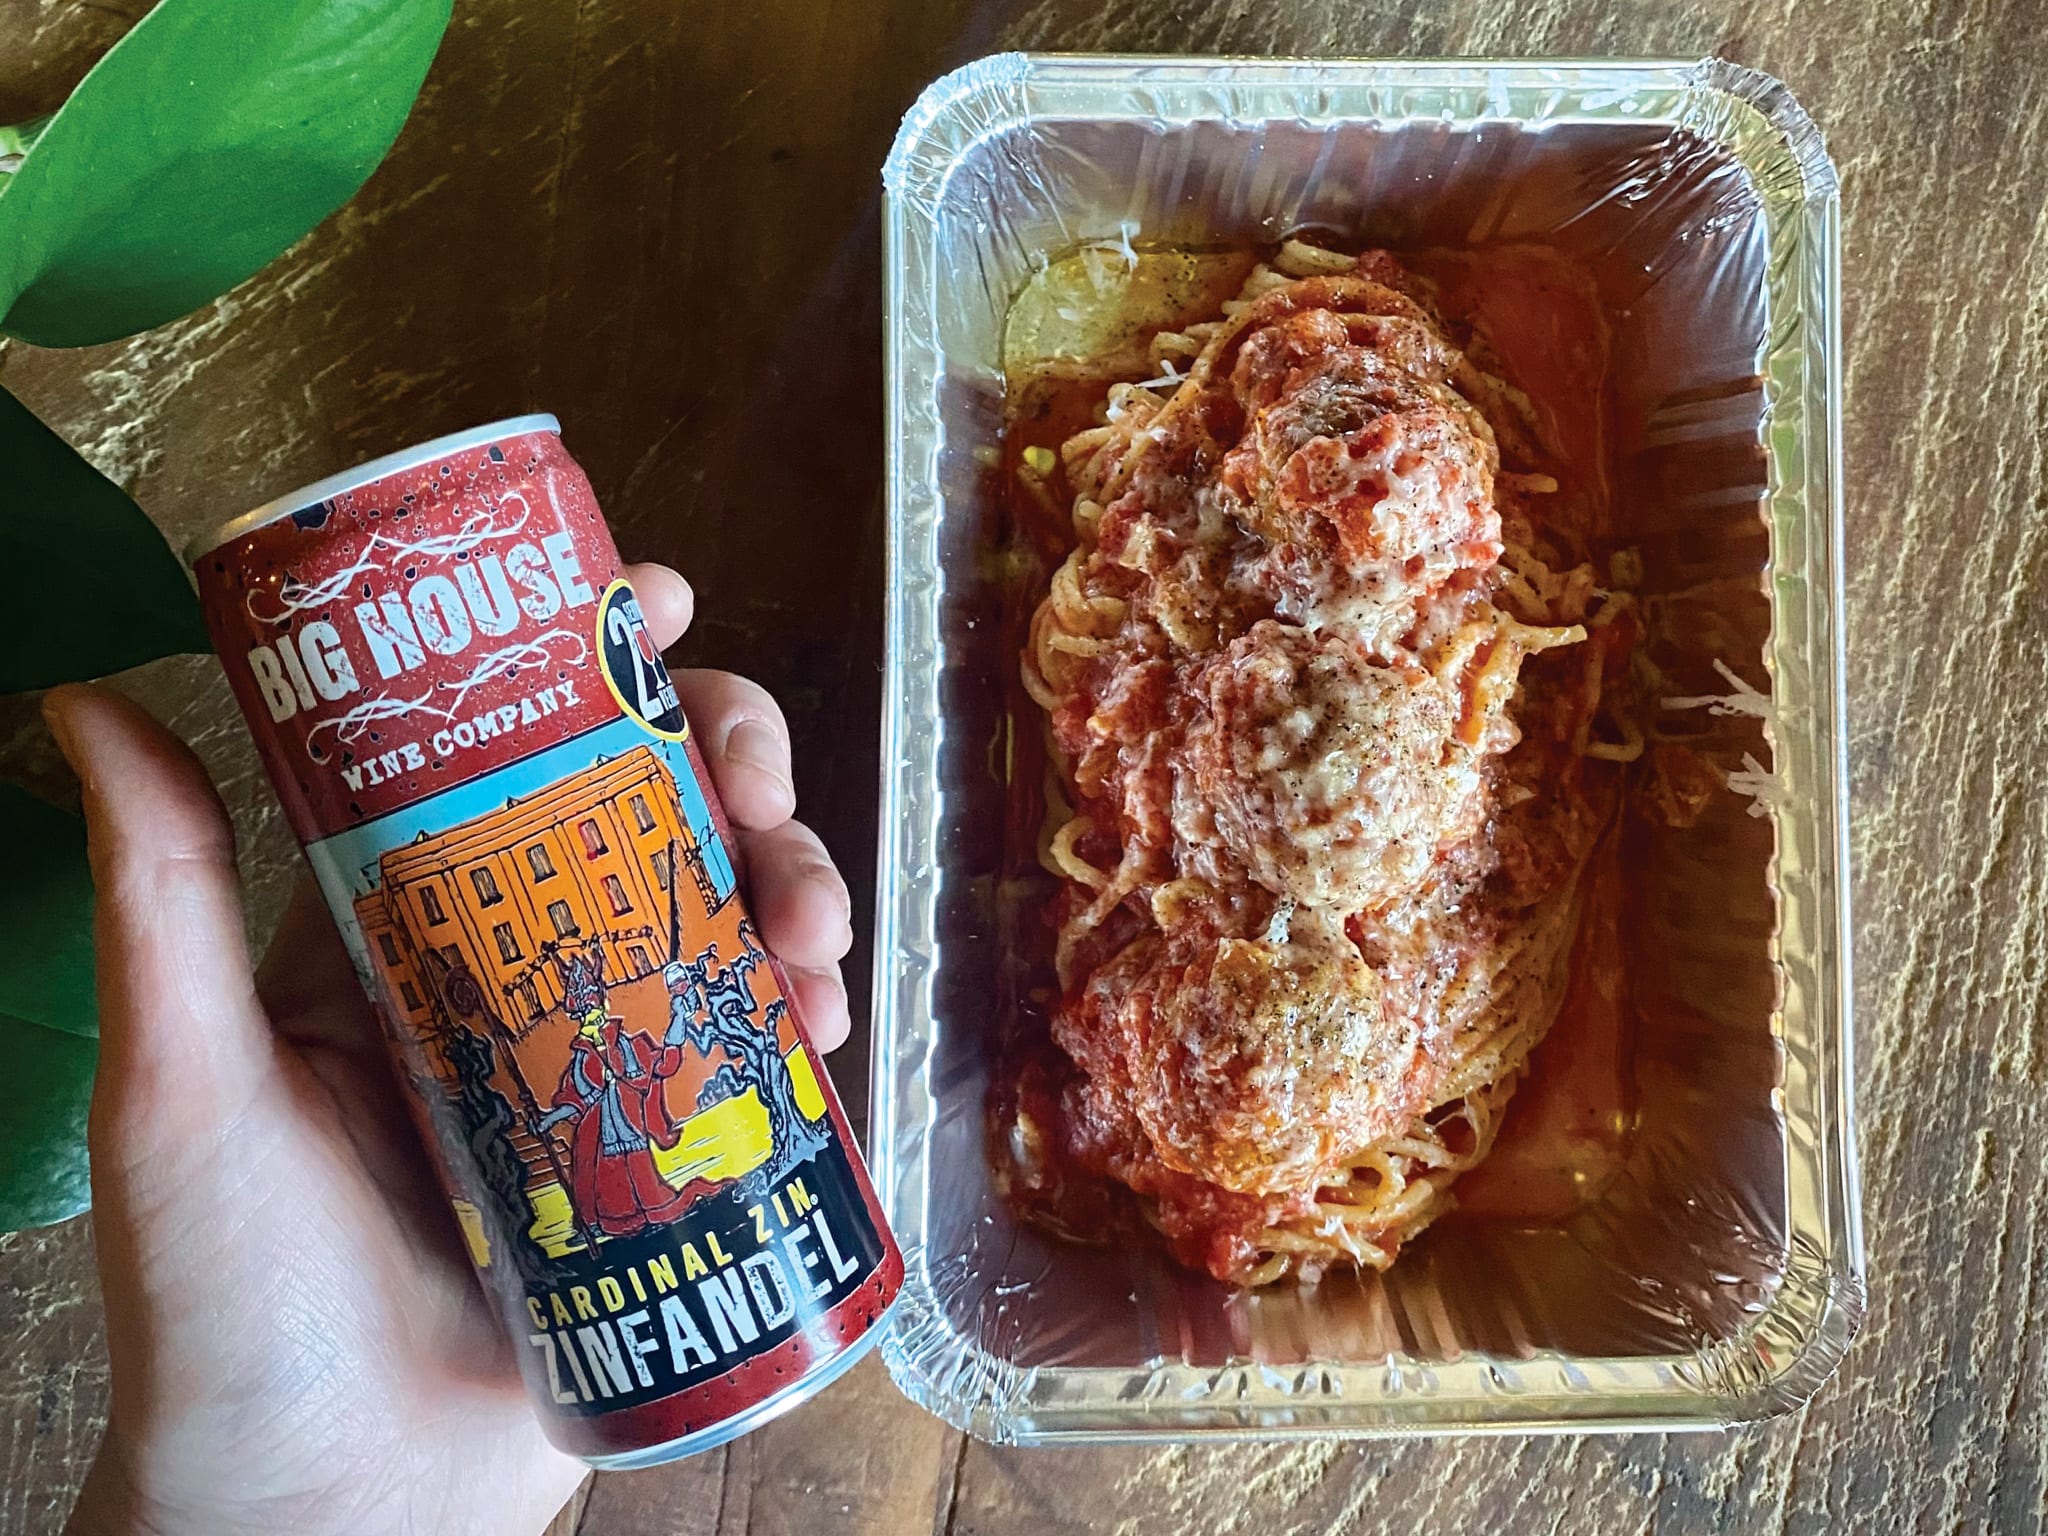 Spaghetti, meatballs and a can of Zin